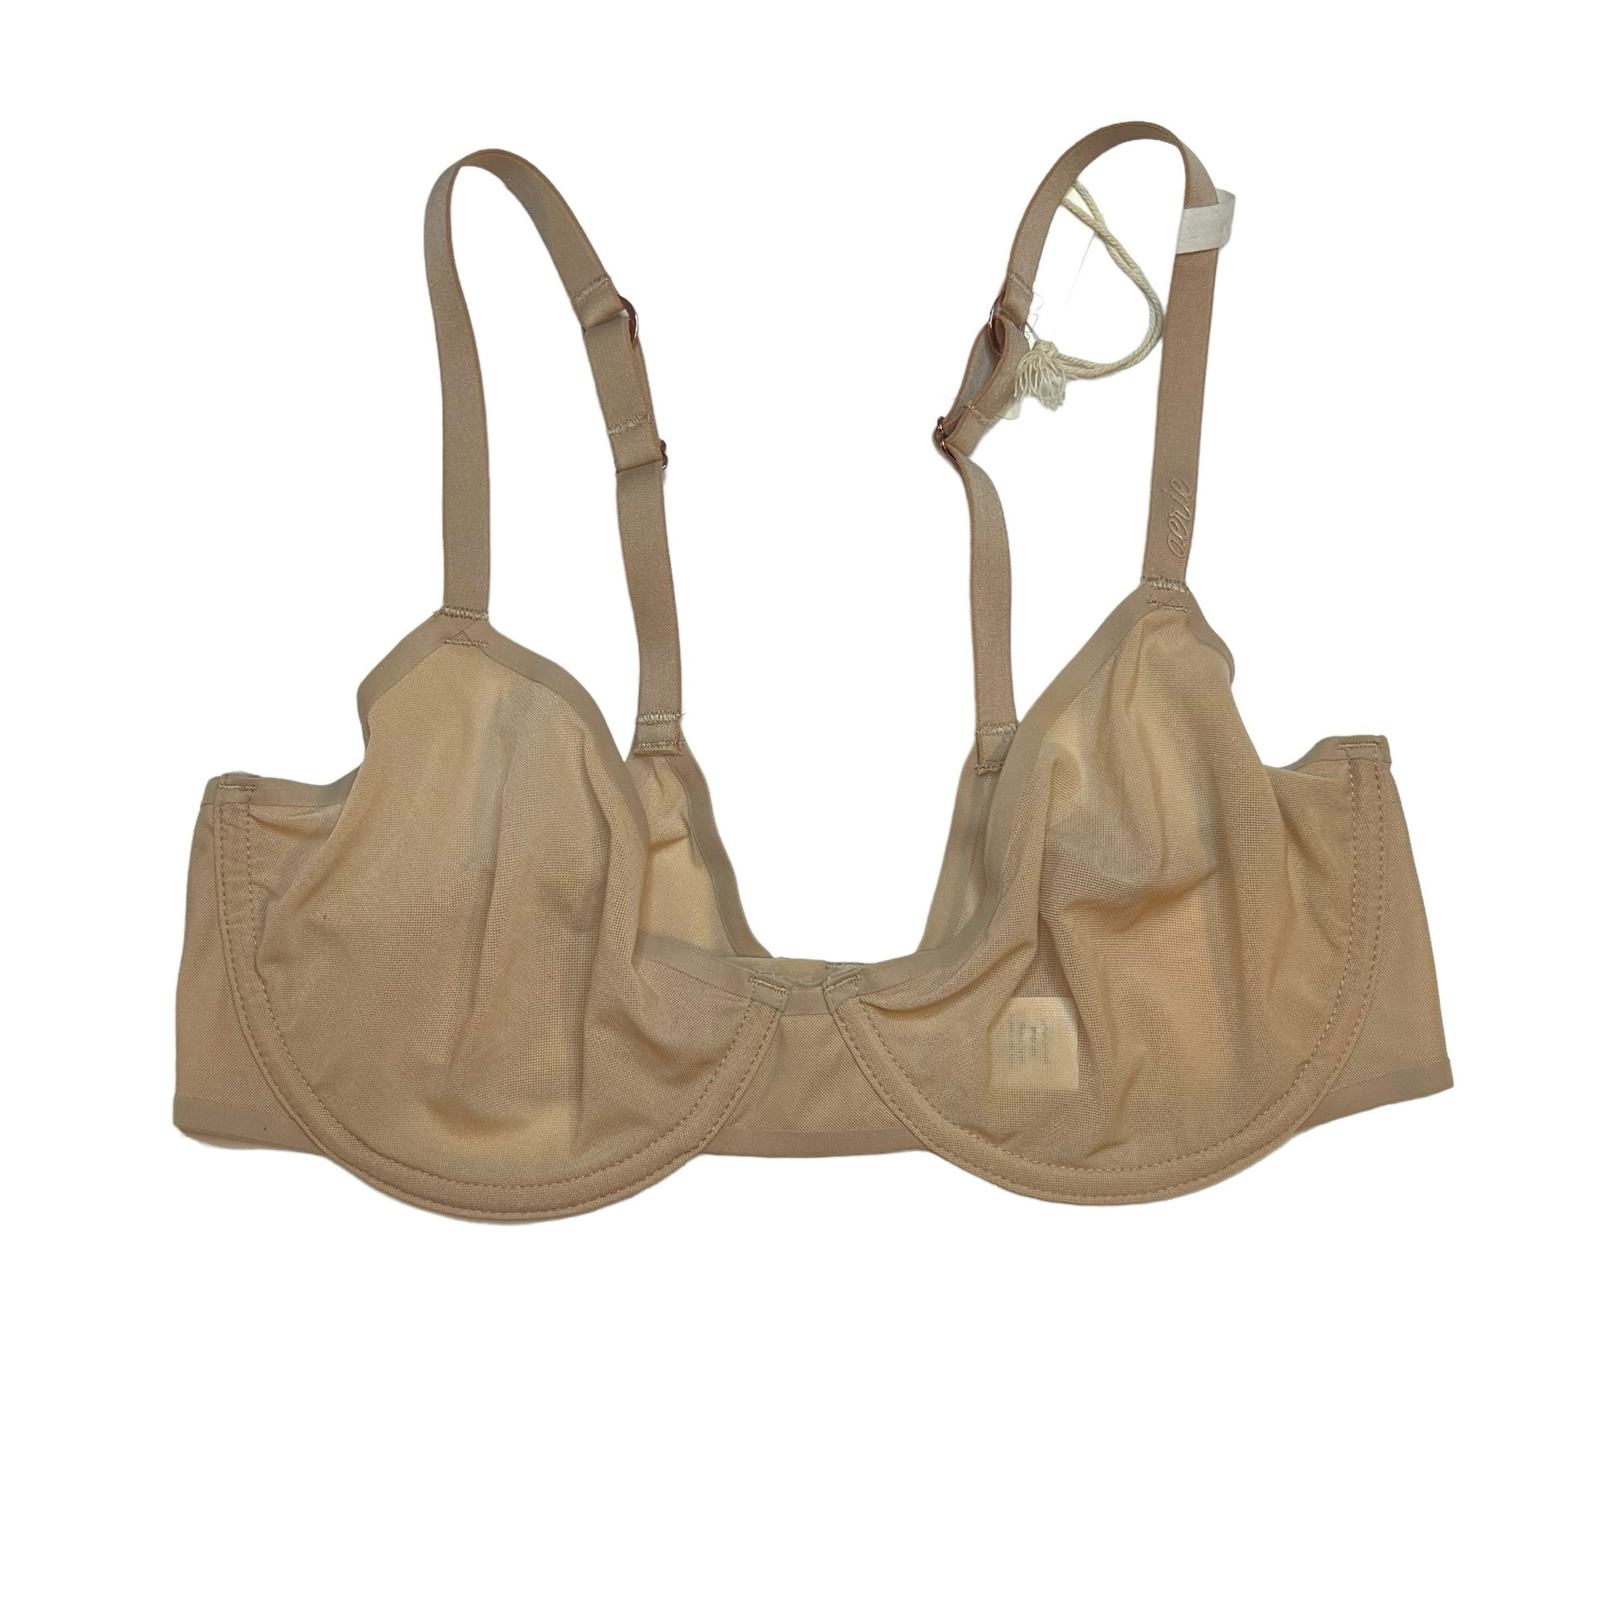 Primary image for Aerie Smoothez Balconette Bra Light Tan Mesh Underwire Size 32B New